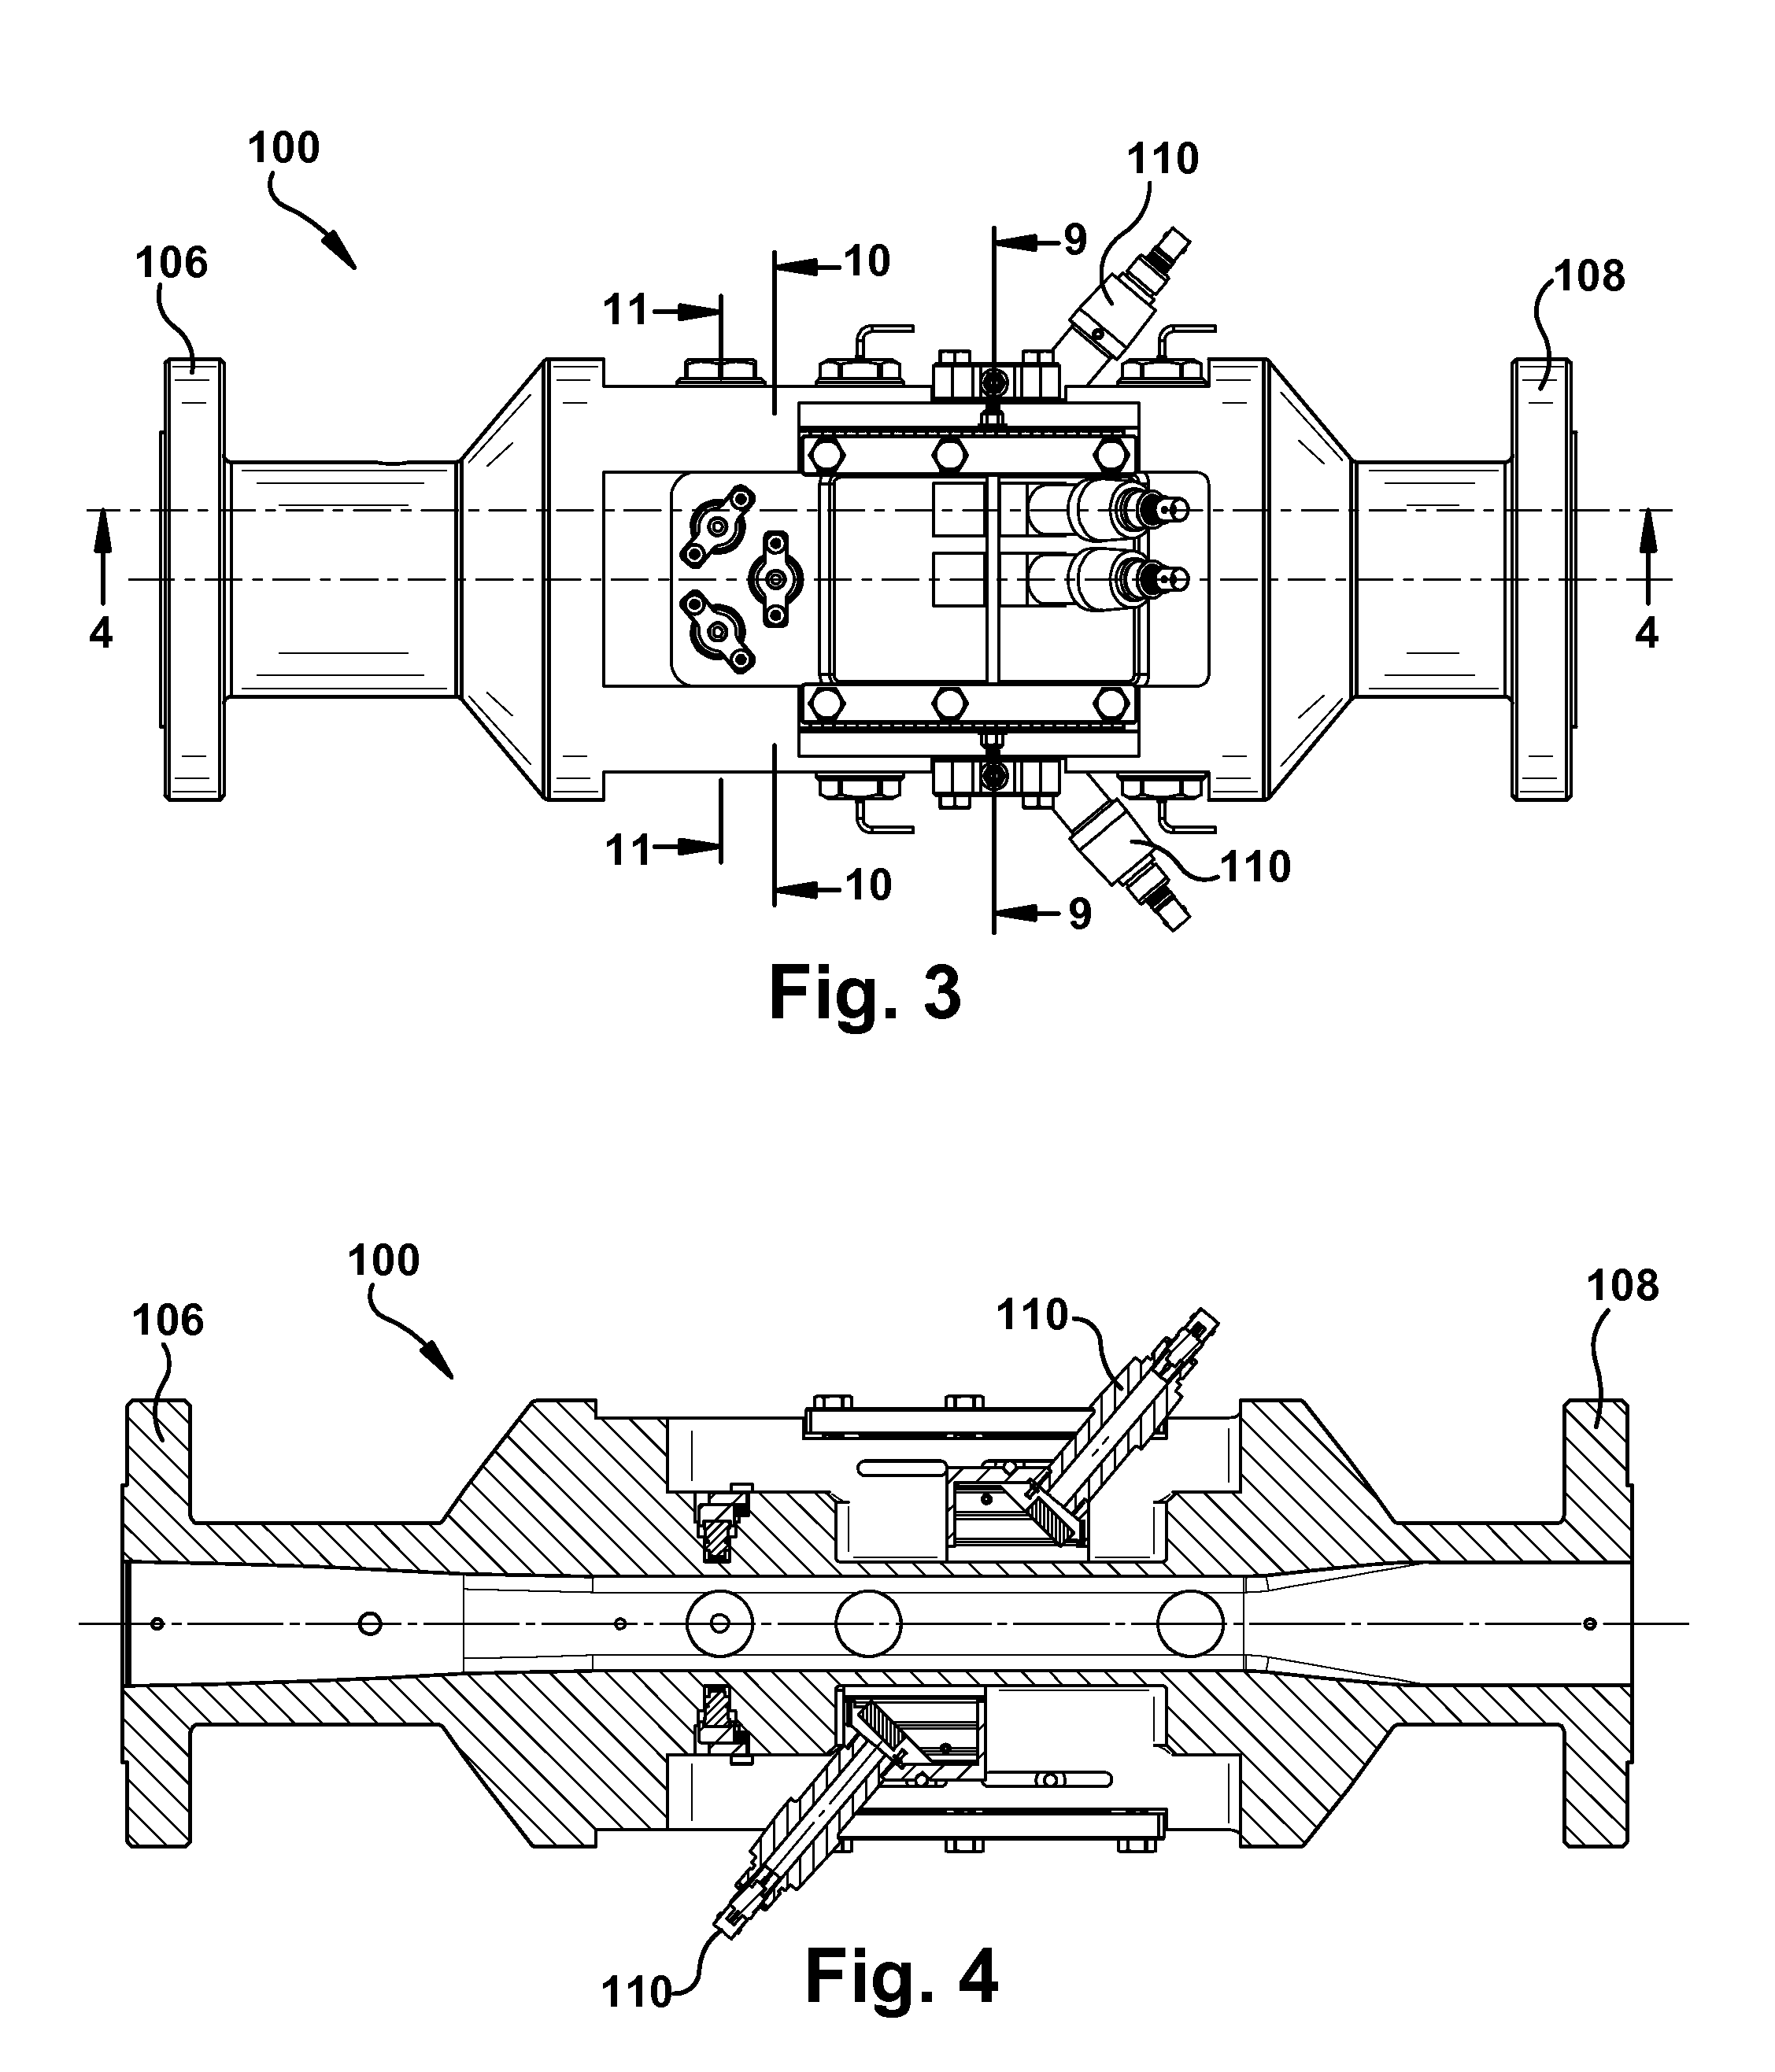 Flowmeter with a flow conditioner formed by a protrusion having restriction provided upstream of the measurement section